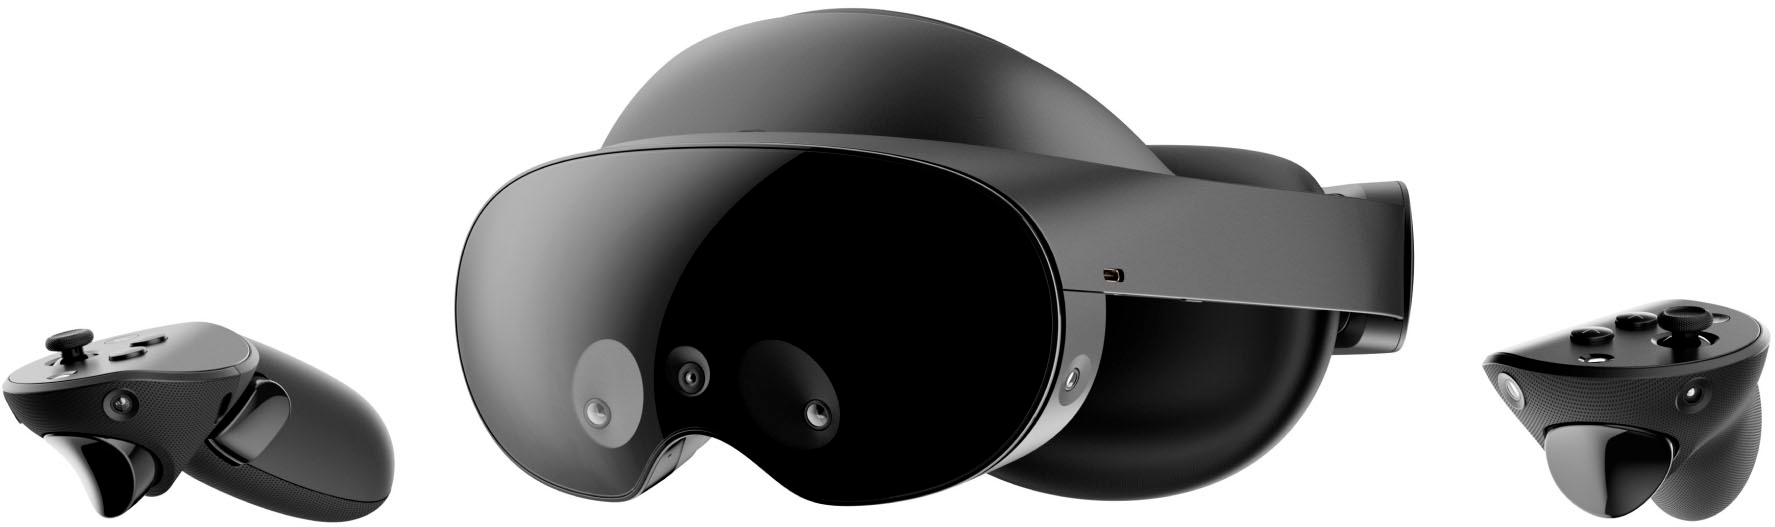 Meta Quest Pro VR Headset WAS $1,499.99 NOW $999.99